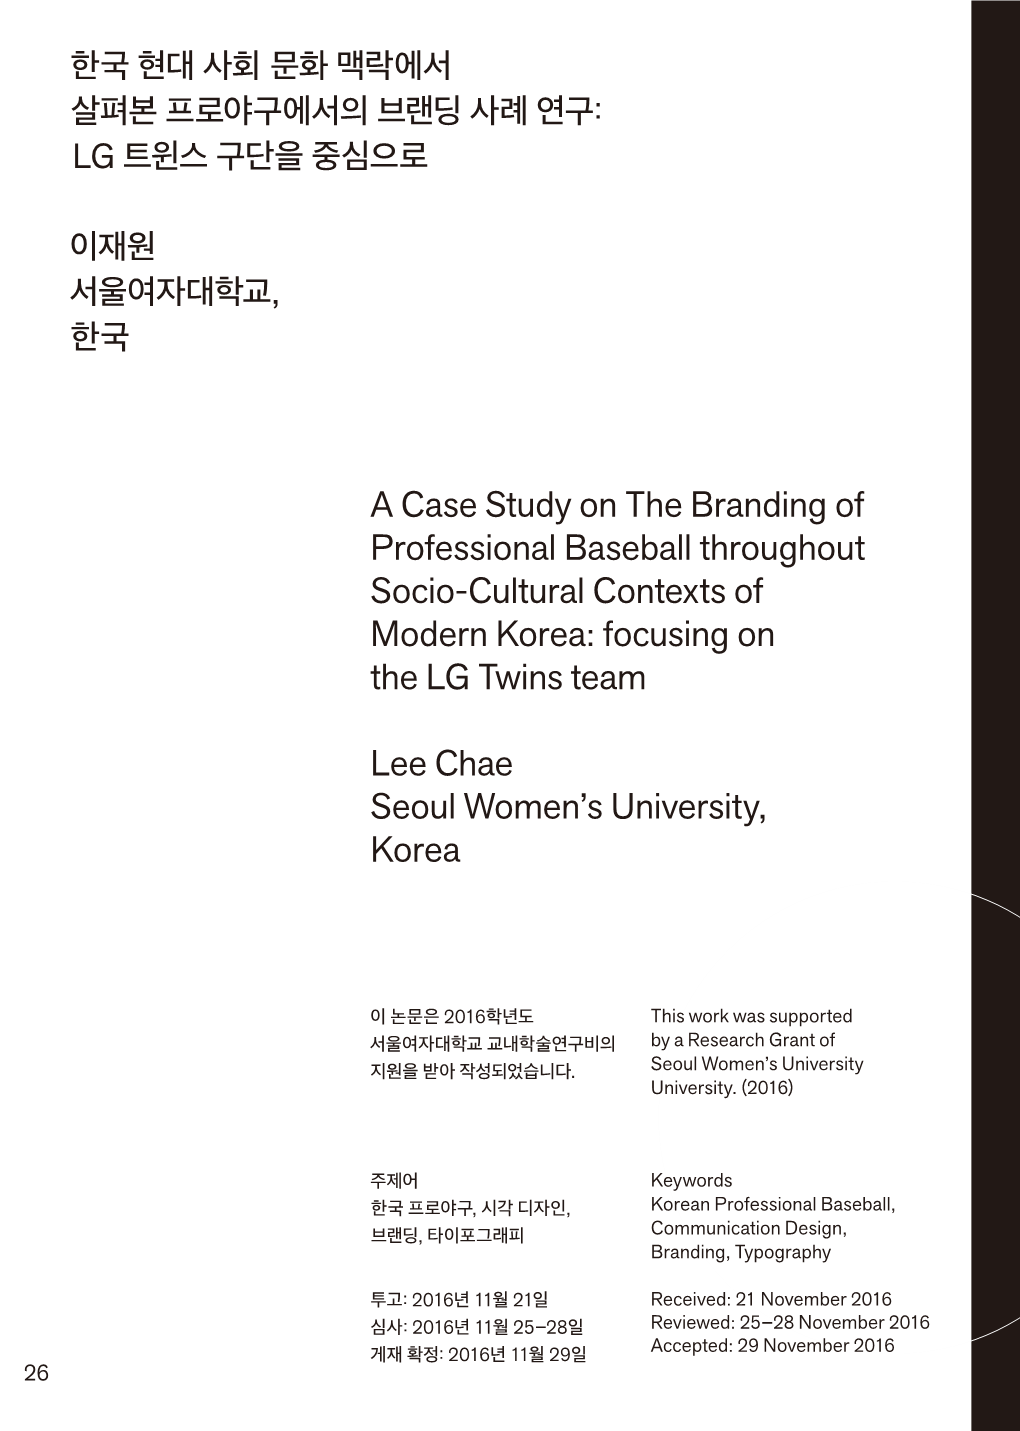 A Case Study on the Branding of Professional Baseball Throughout Socio-Cultural Contexts of Modern Korea: Focusing on the LG Twins Team